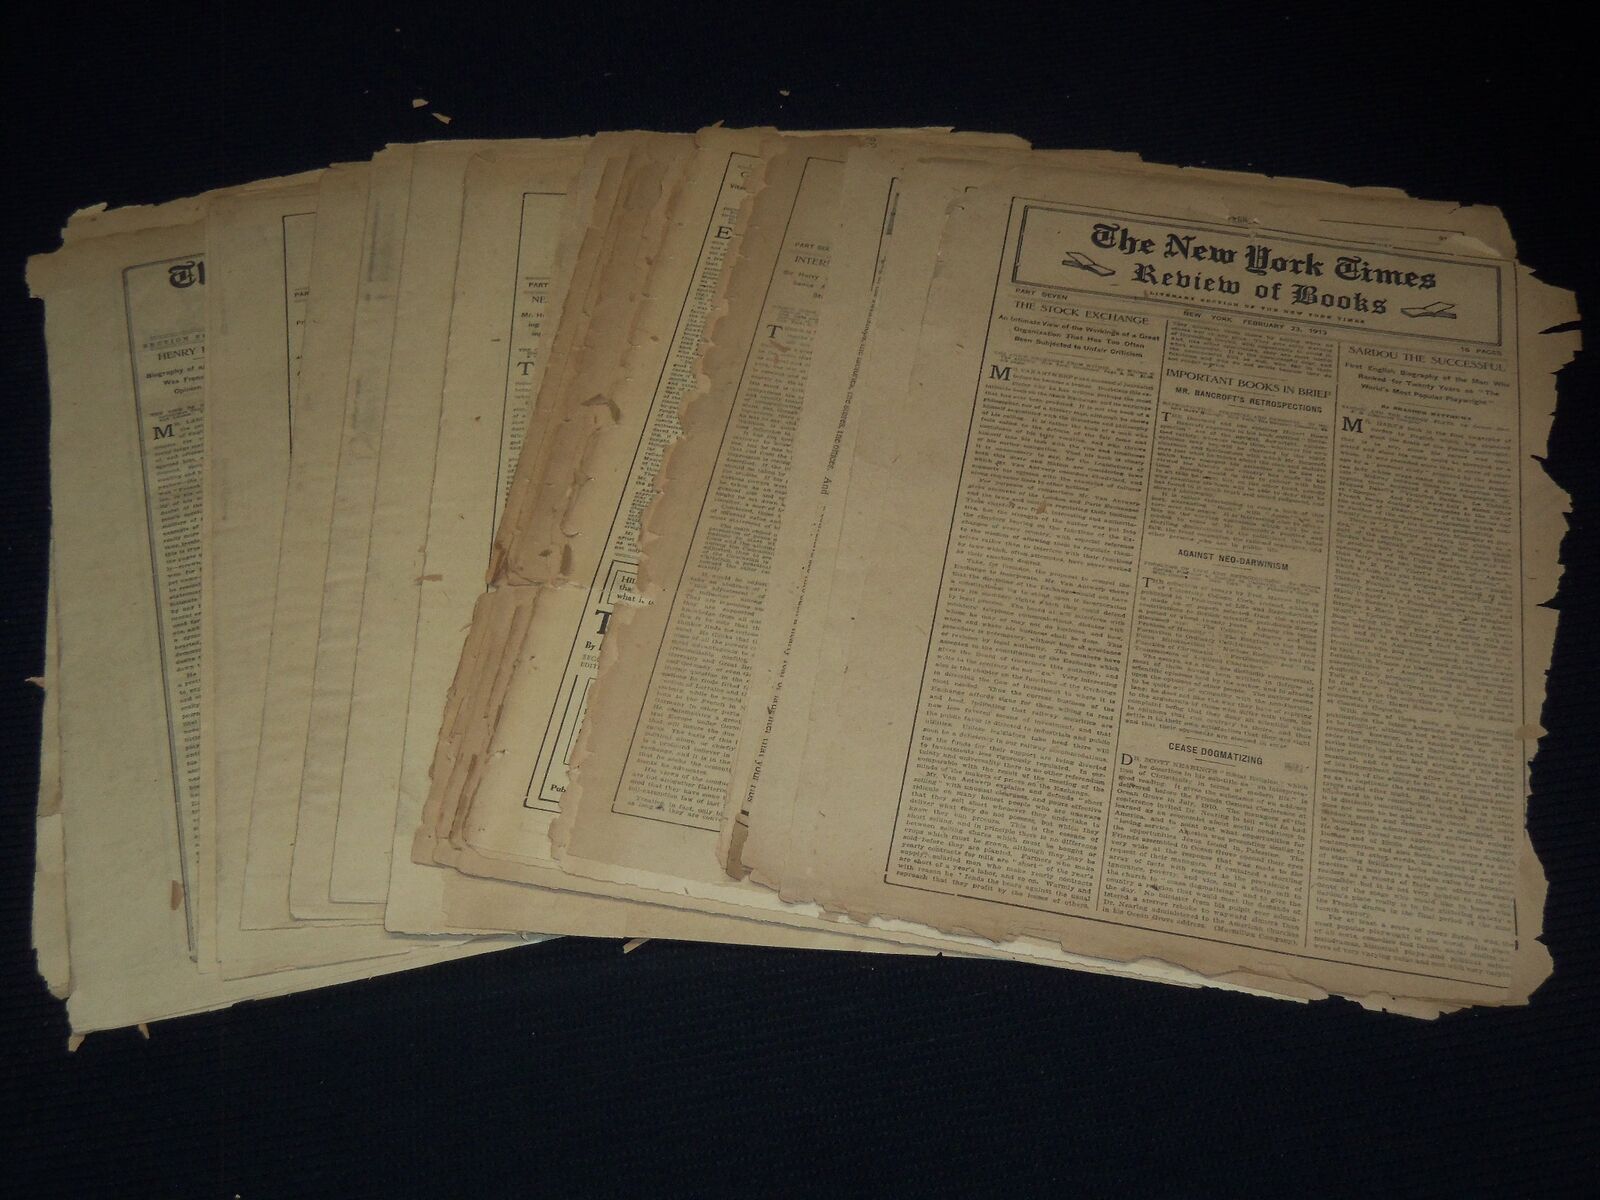 1913 NEW YORK TIMES NEWSPAPER BOOK REVIEW SECTIONS LOT OF 15 ISSUES - O 3221B